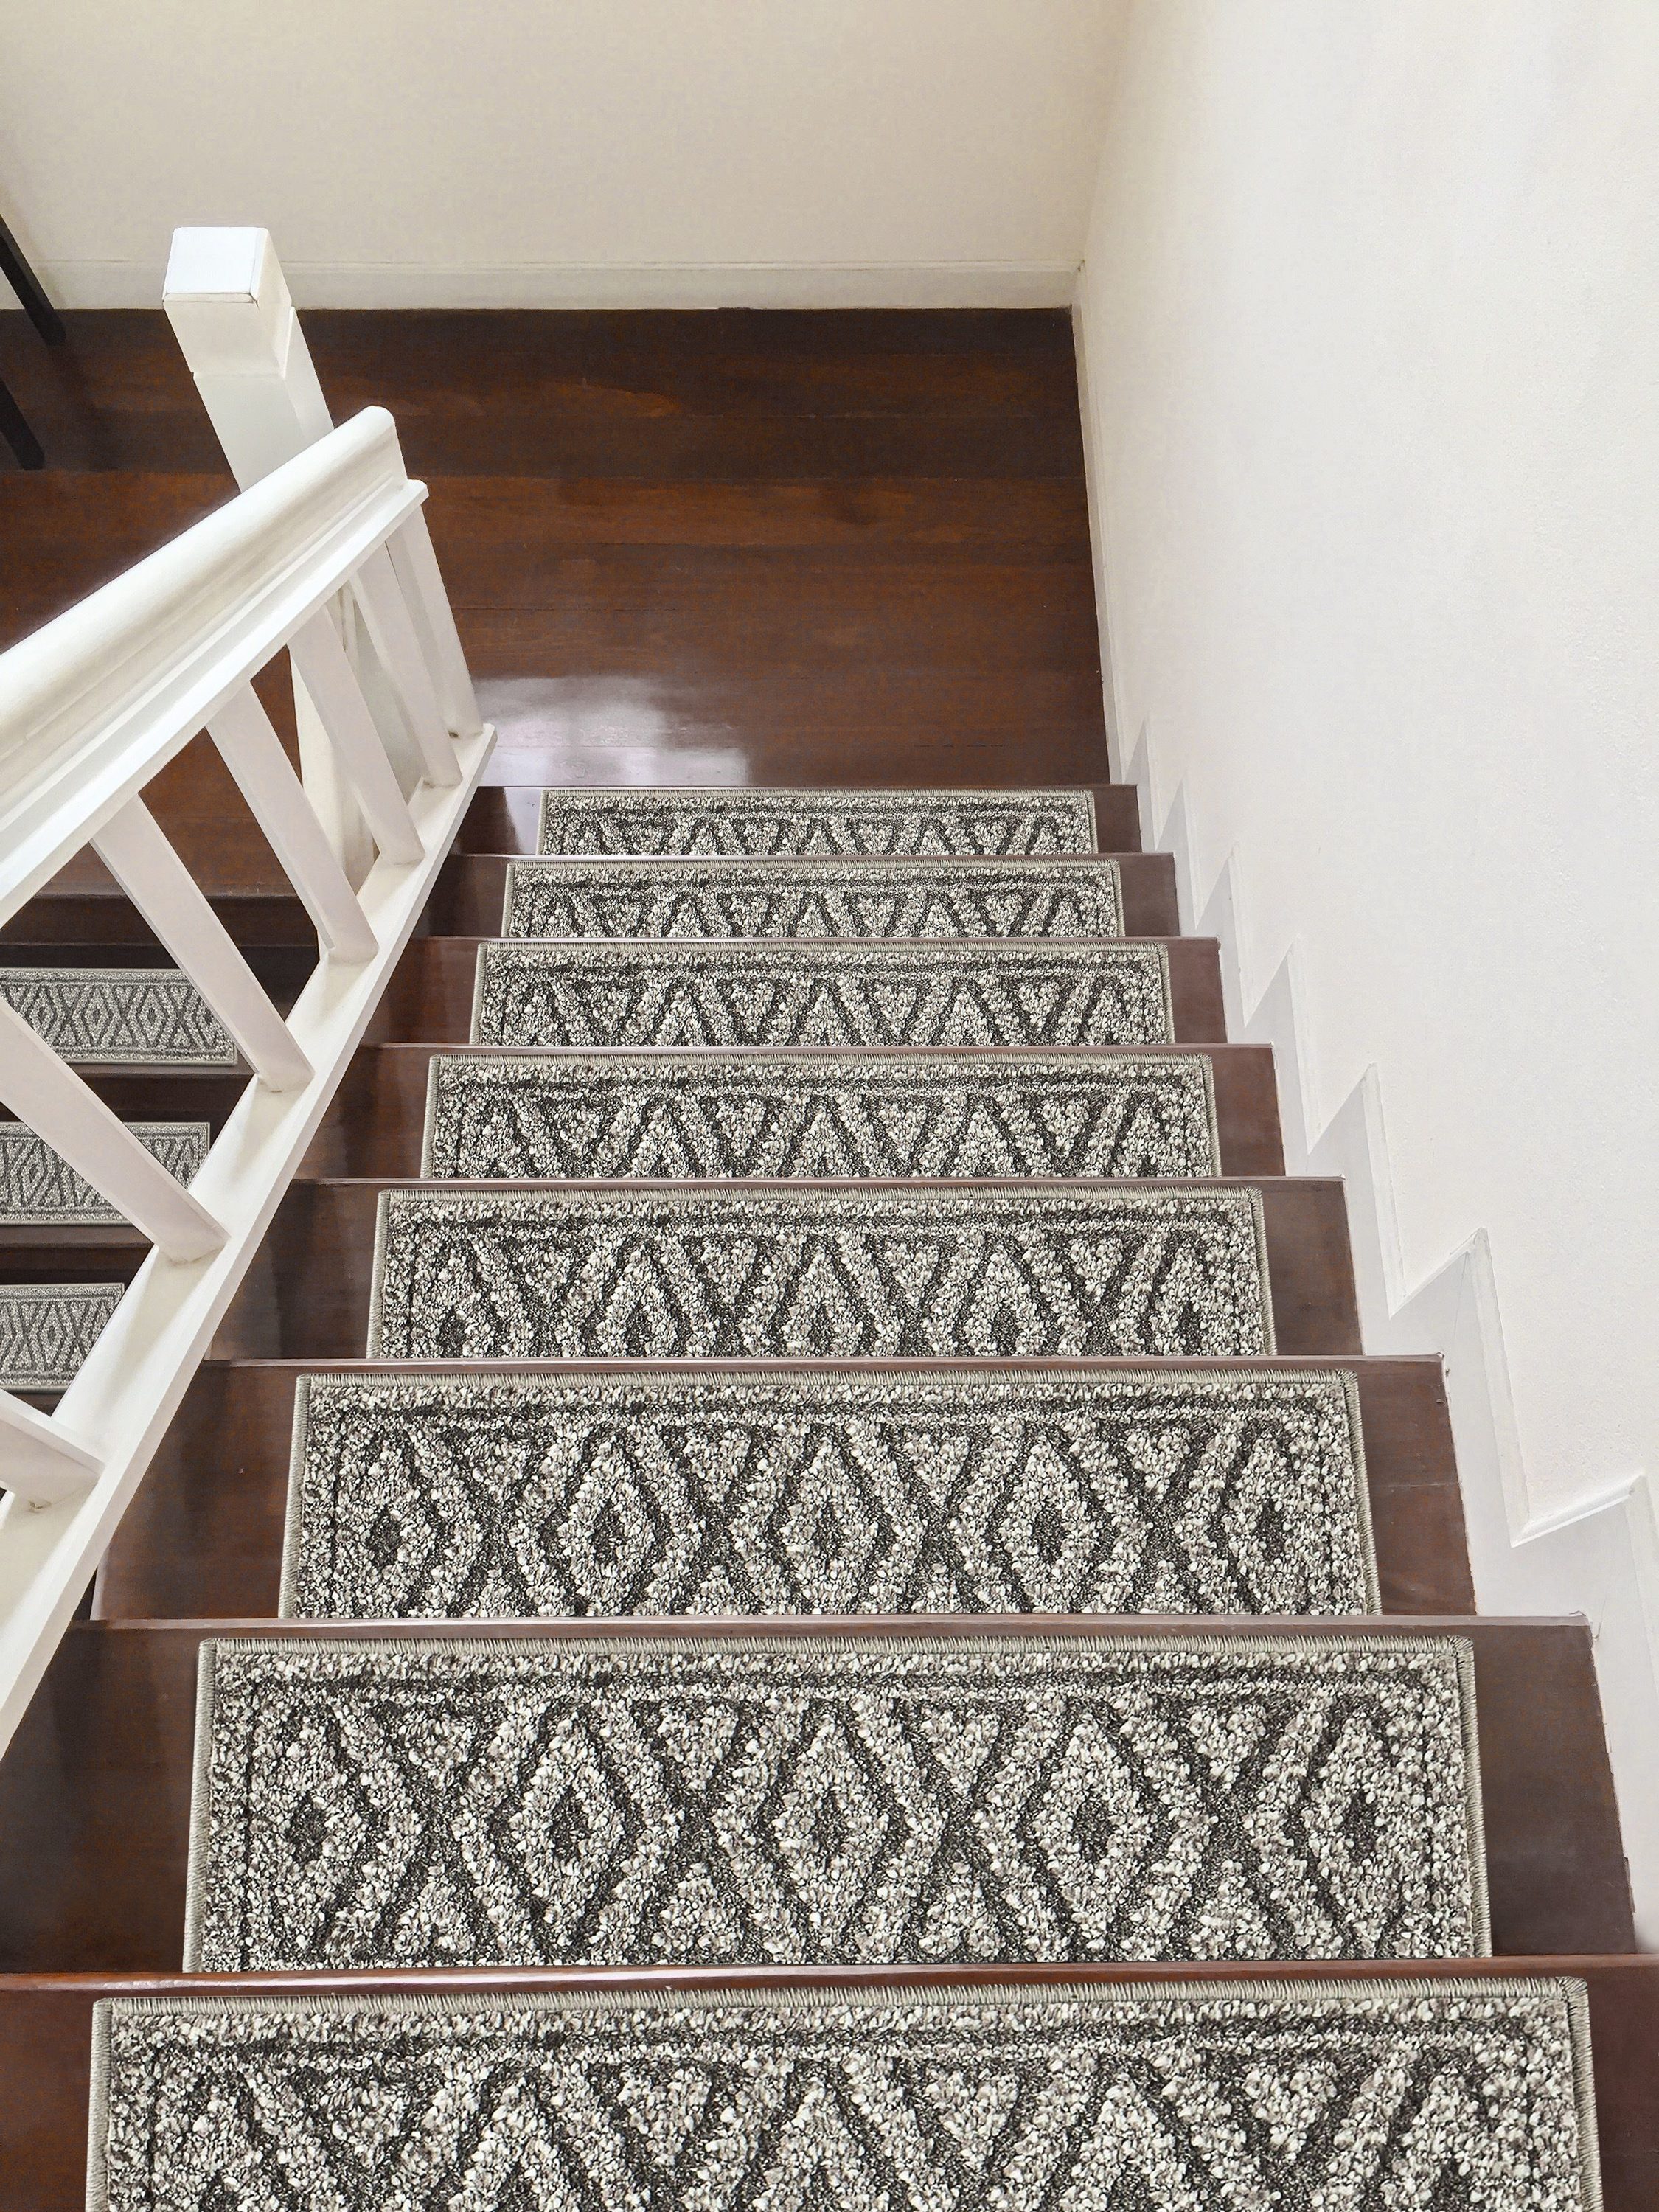 UK Stair Tread Carpet Mats Step Staircase Non Slip Mat Protection Cover Pads Rug 